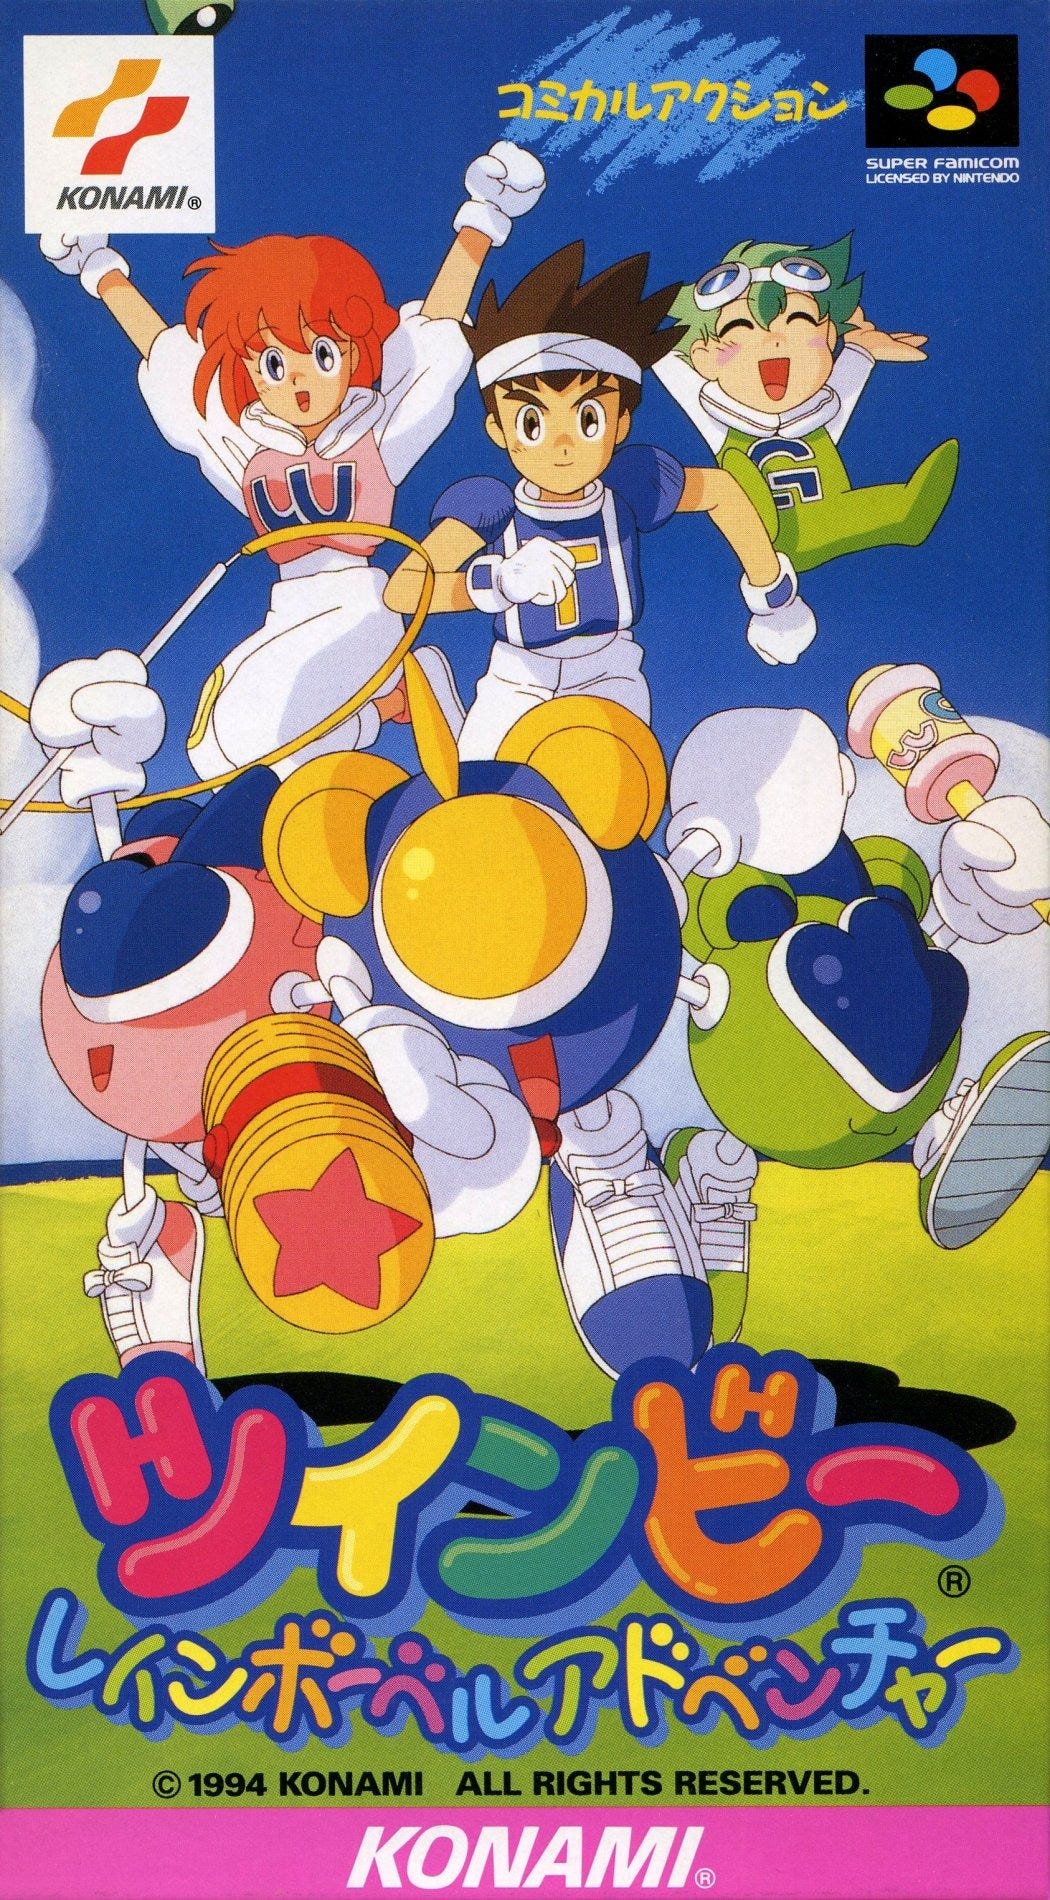 The Super Famicom box art for Rainbow Bell Adventures, featuring the pilots and their ships.